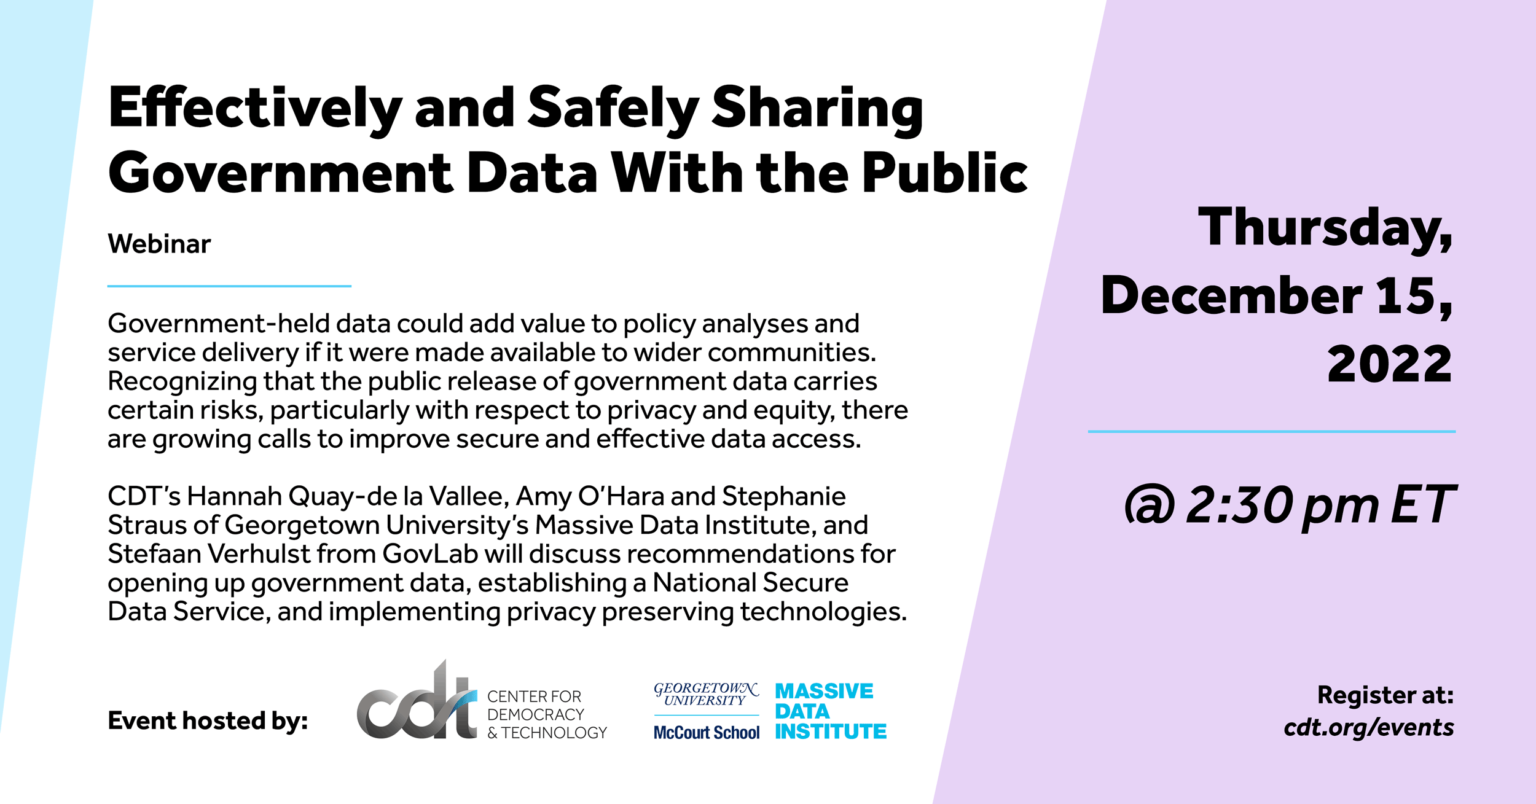 CDT & Georgetown MDI – effectively and safely sharing government data with the public webinar